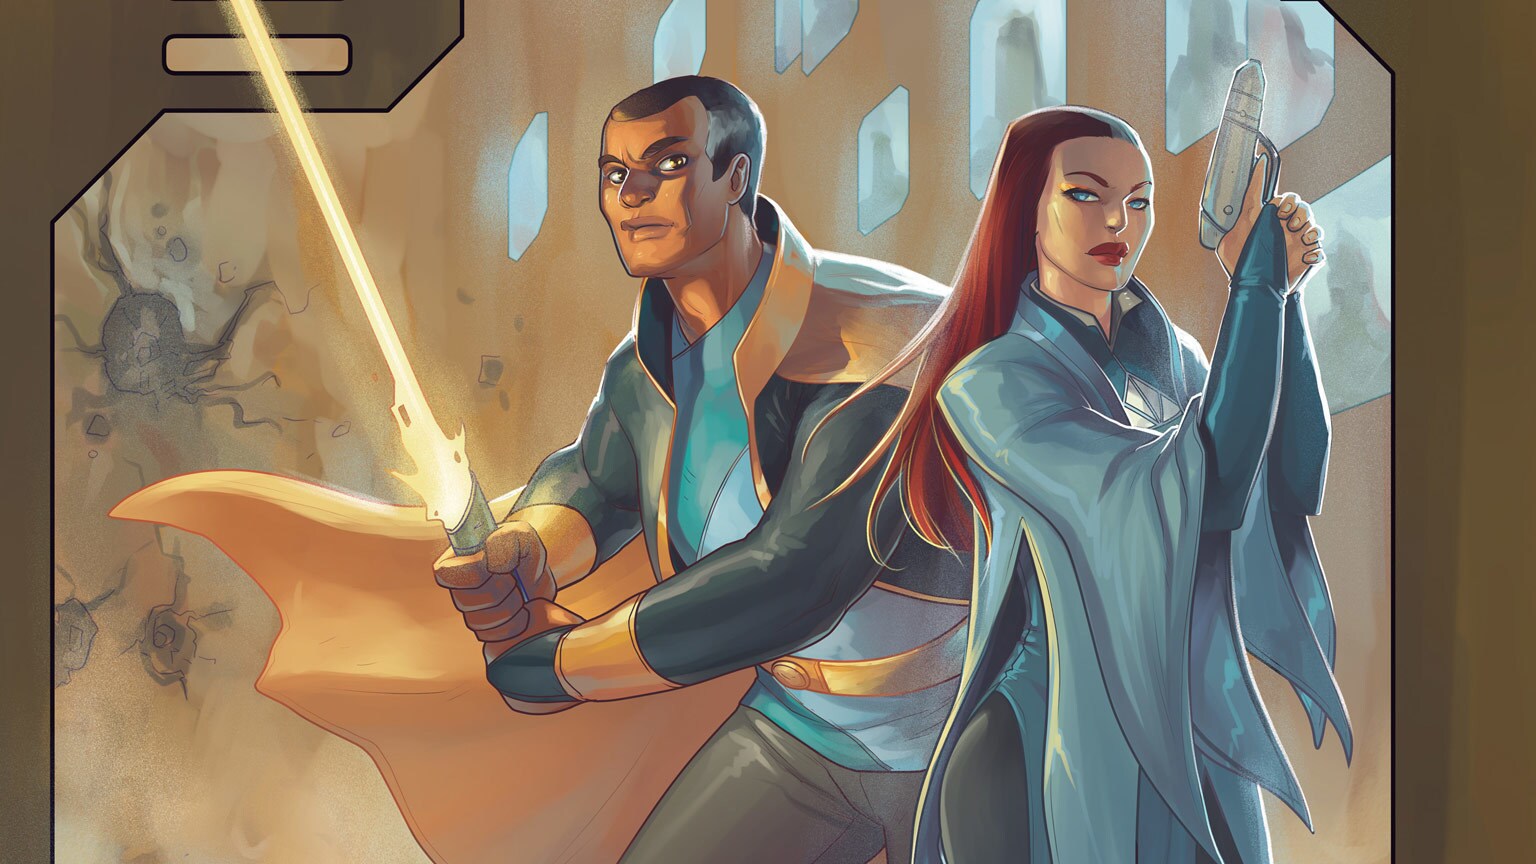 The Plot Thickens in Marvel's Star Wars: The High Republic: Trail of Shadows #2 - Exclusive Cover Reveals